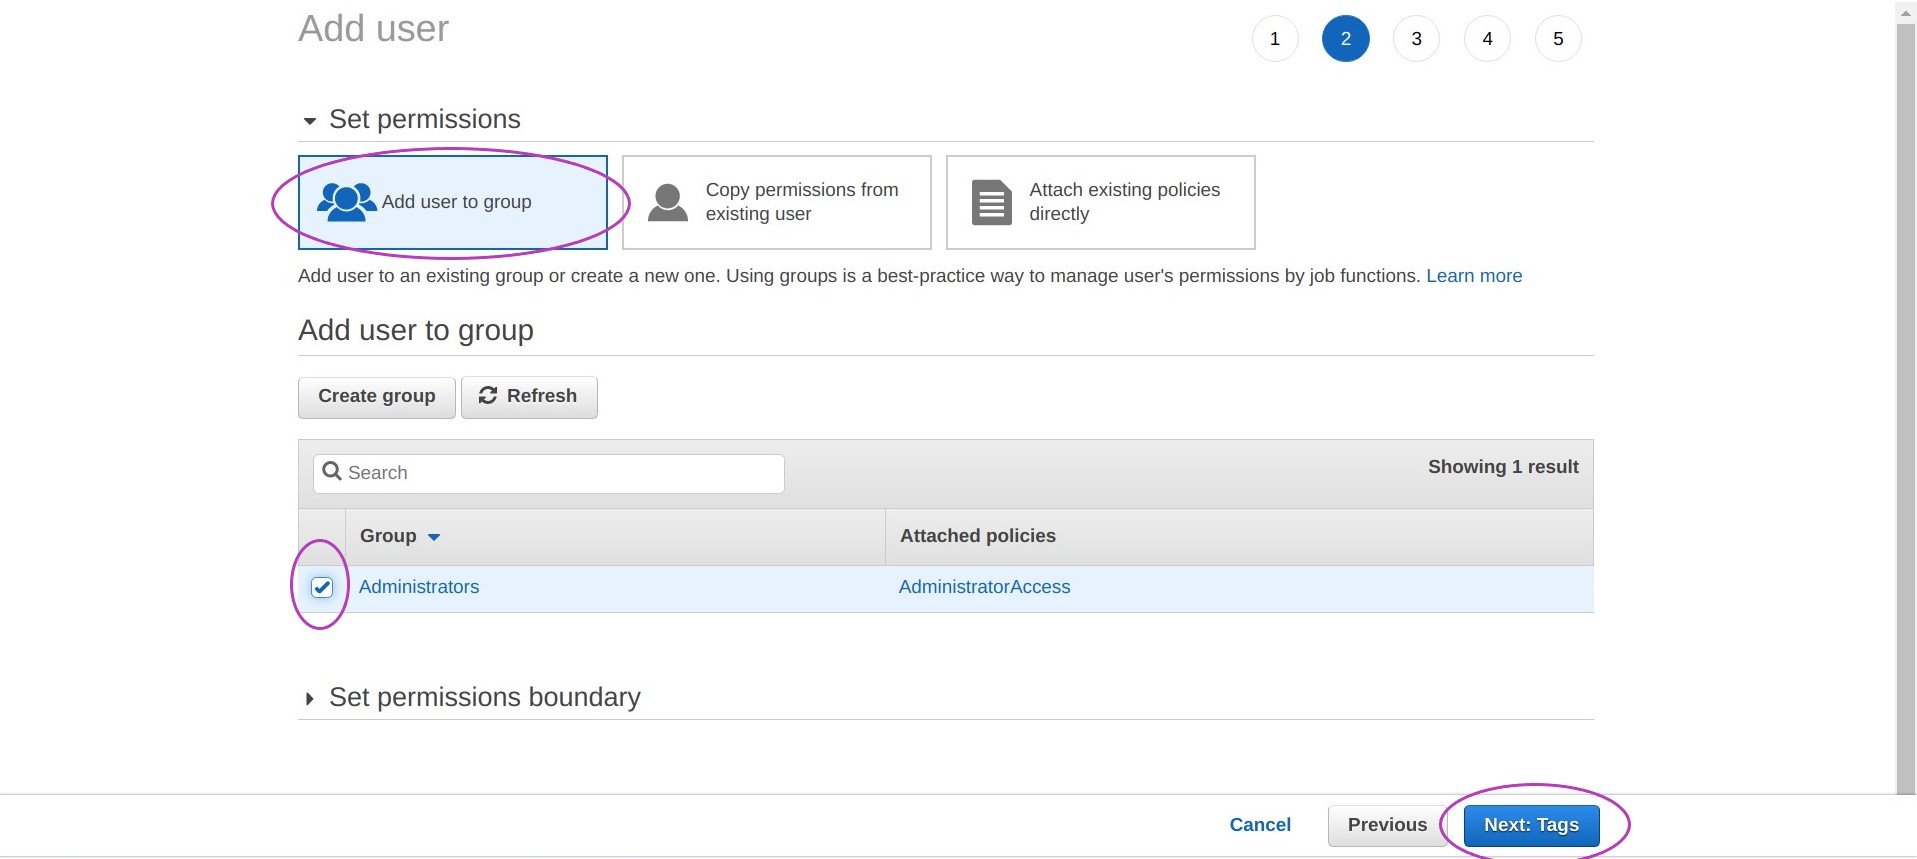 Screen shot of AWS Console IAM Add user Set permissions page in a browser with the option "Add user to group" circled, the group Administrators checked and circled, and the button "Next: Tags" circled